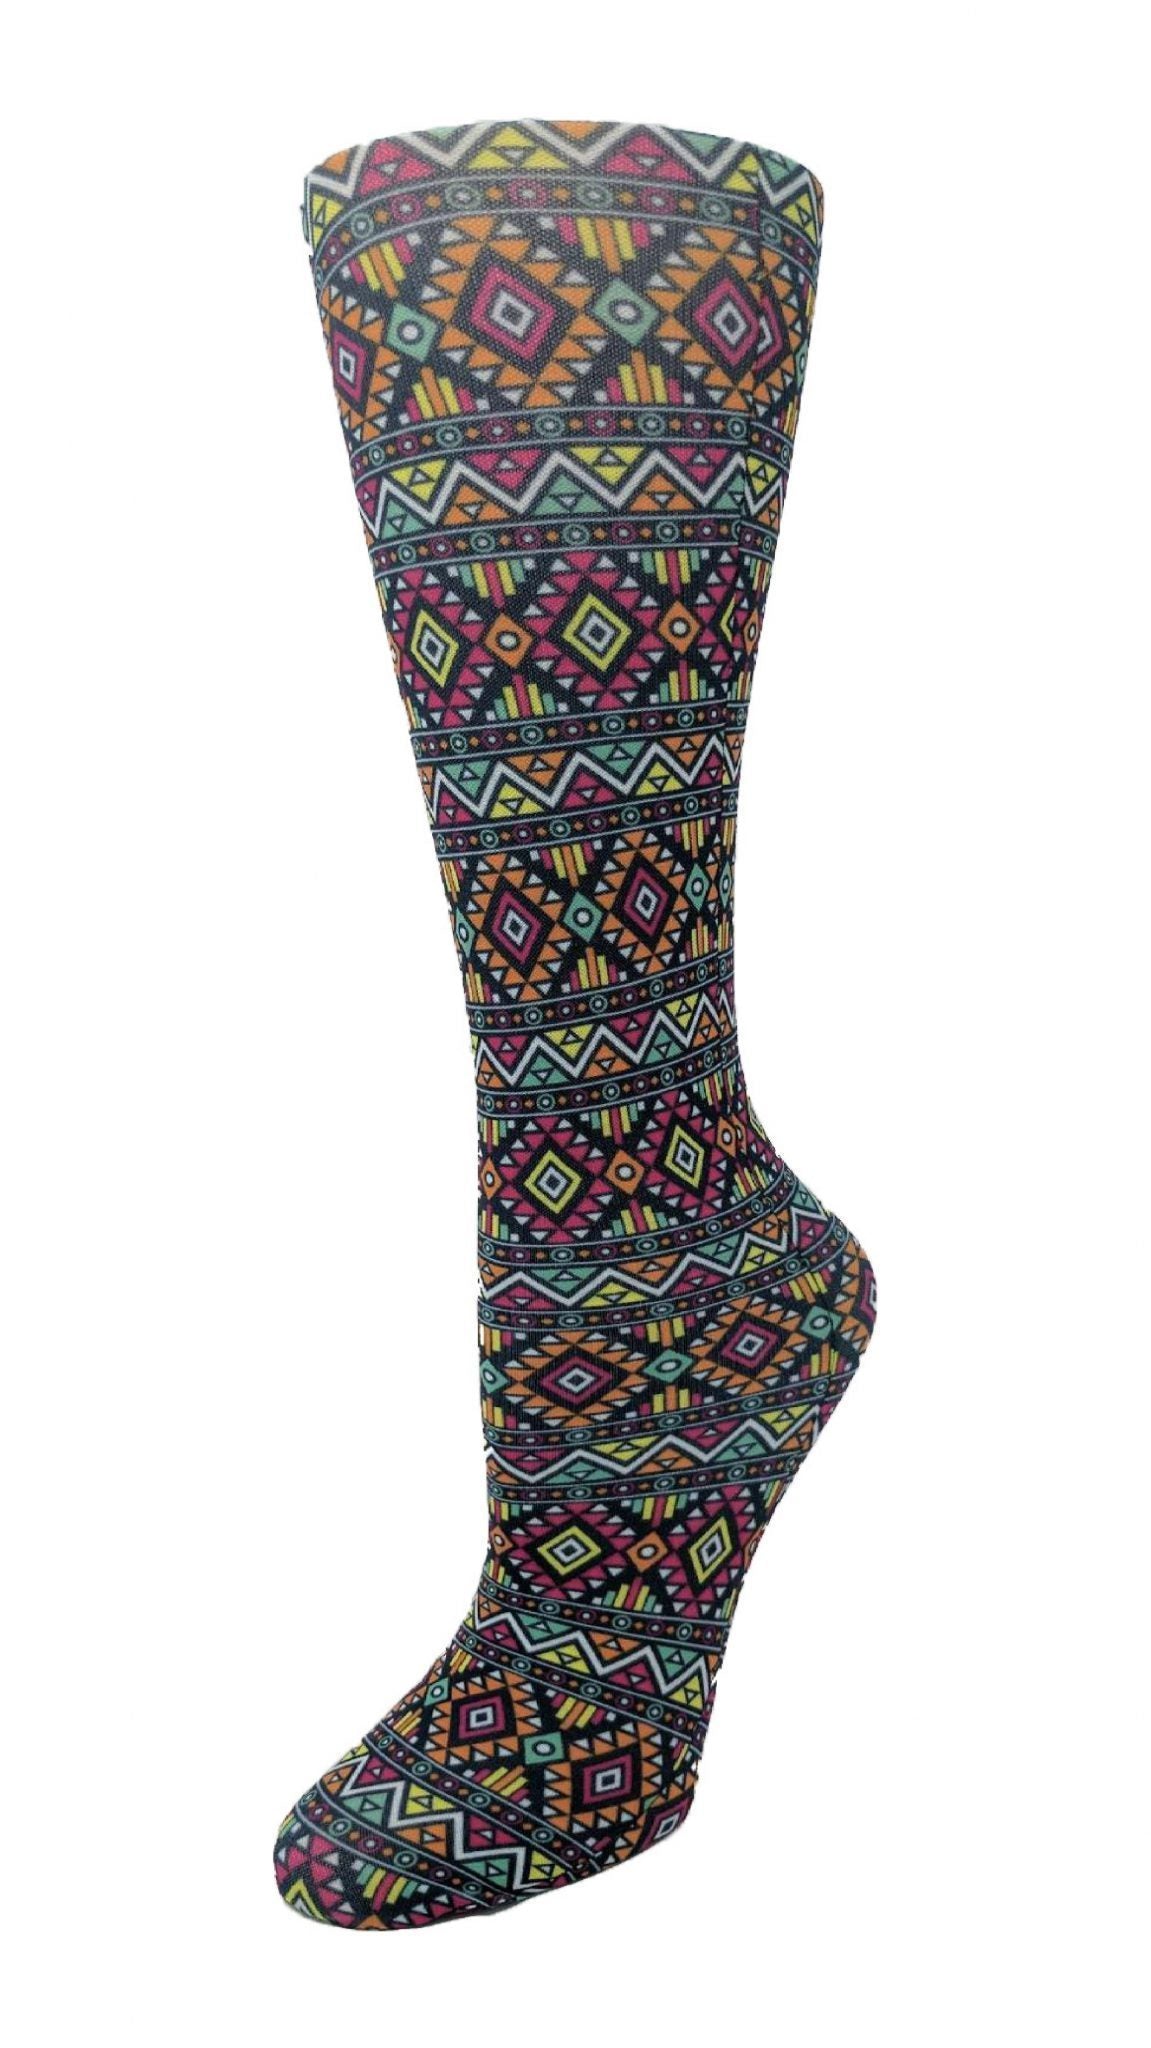 Cutieful Moderate Compression Socks 10-18 MMhg Wide Calf Knit Print Pattern Azteca at Parker's Clothing and Shoes.